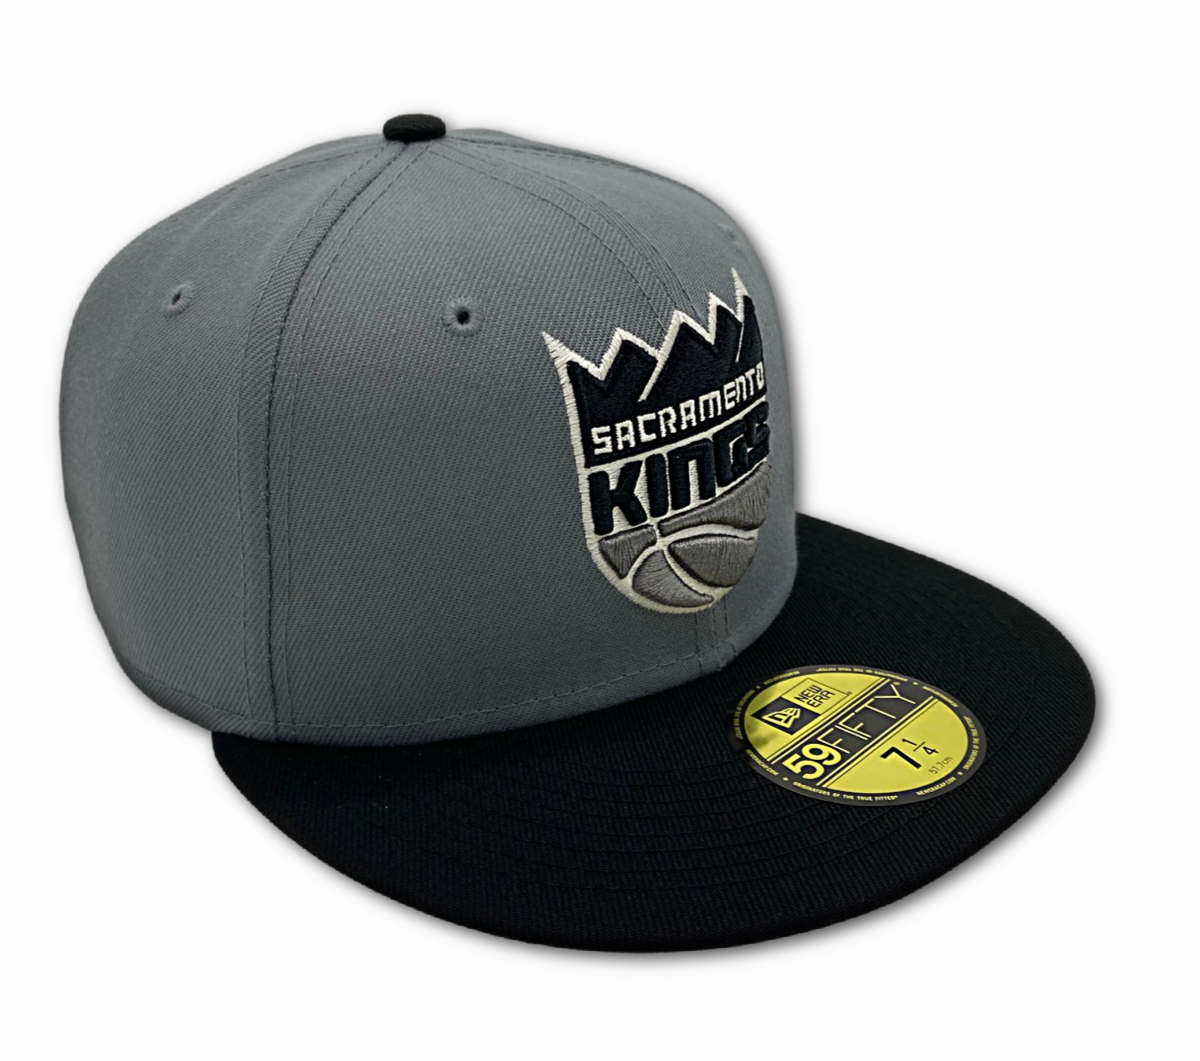 Sacramento Kings New Era 2TONE COLOR PACK 59FIFTY Fitted Hat nvsoccer.com The Coliseum